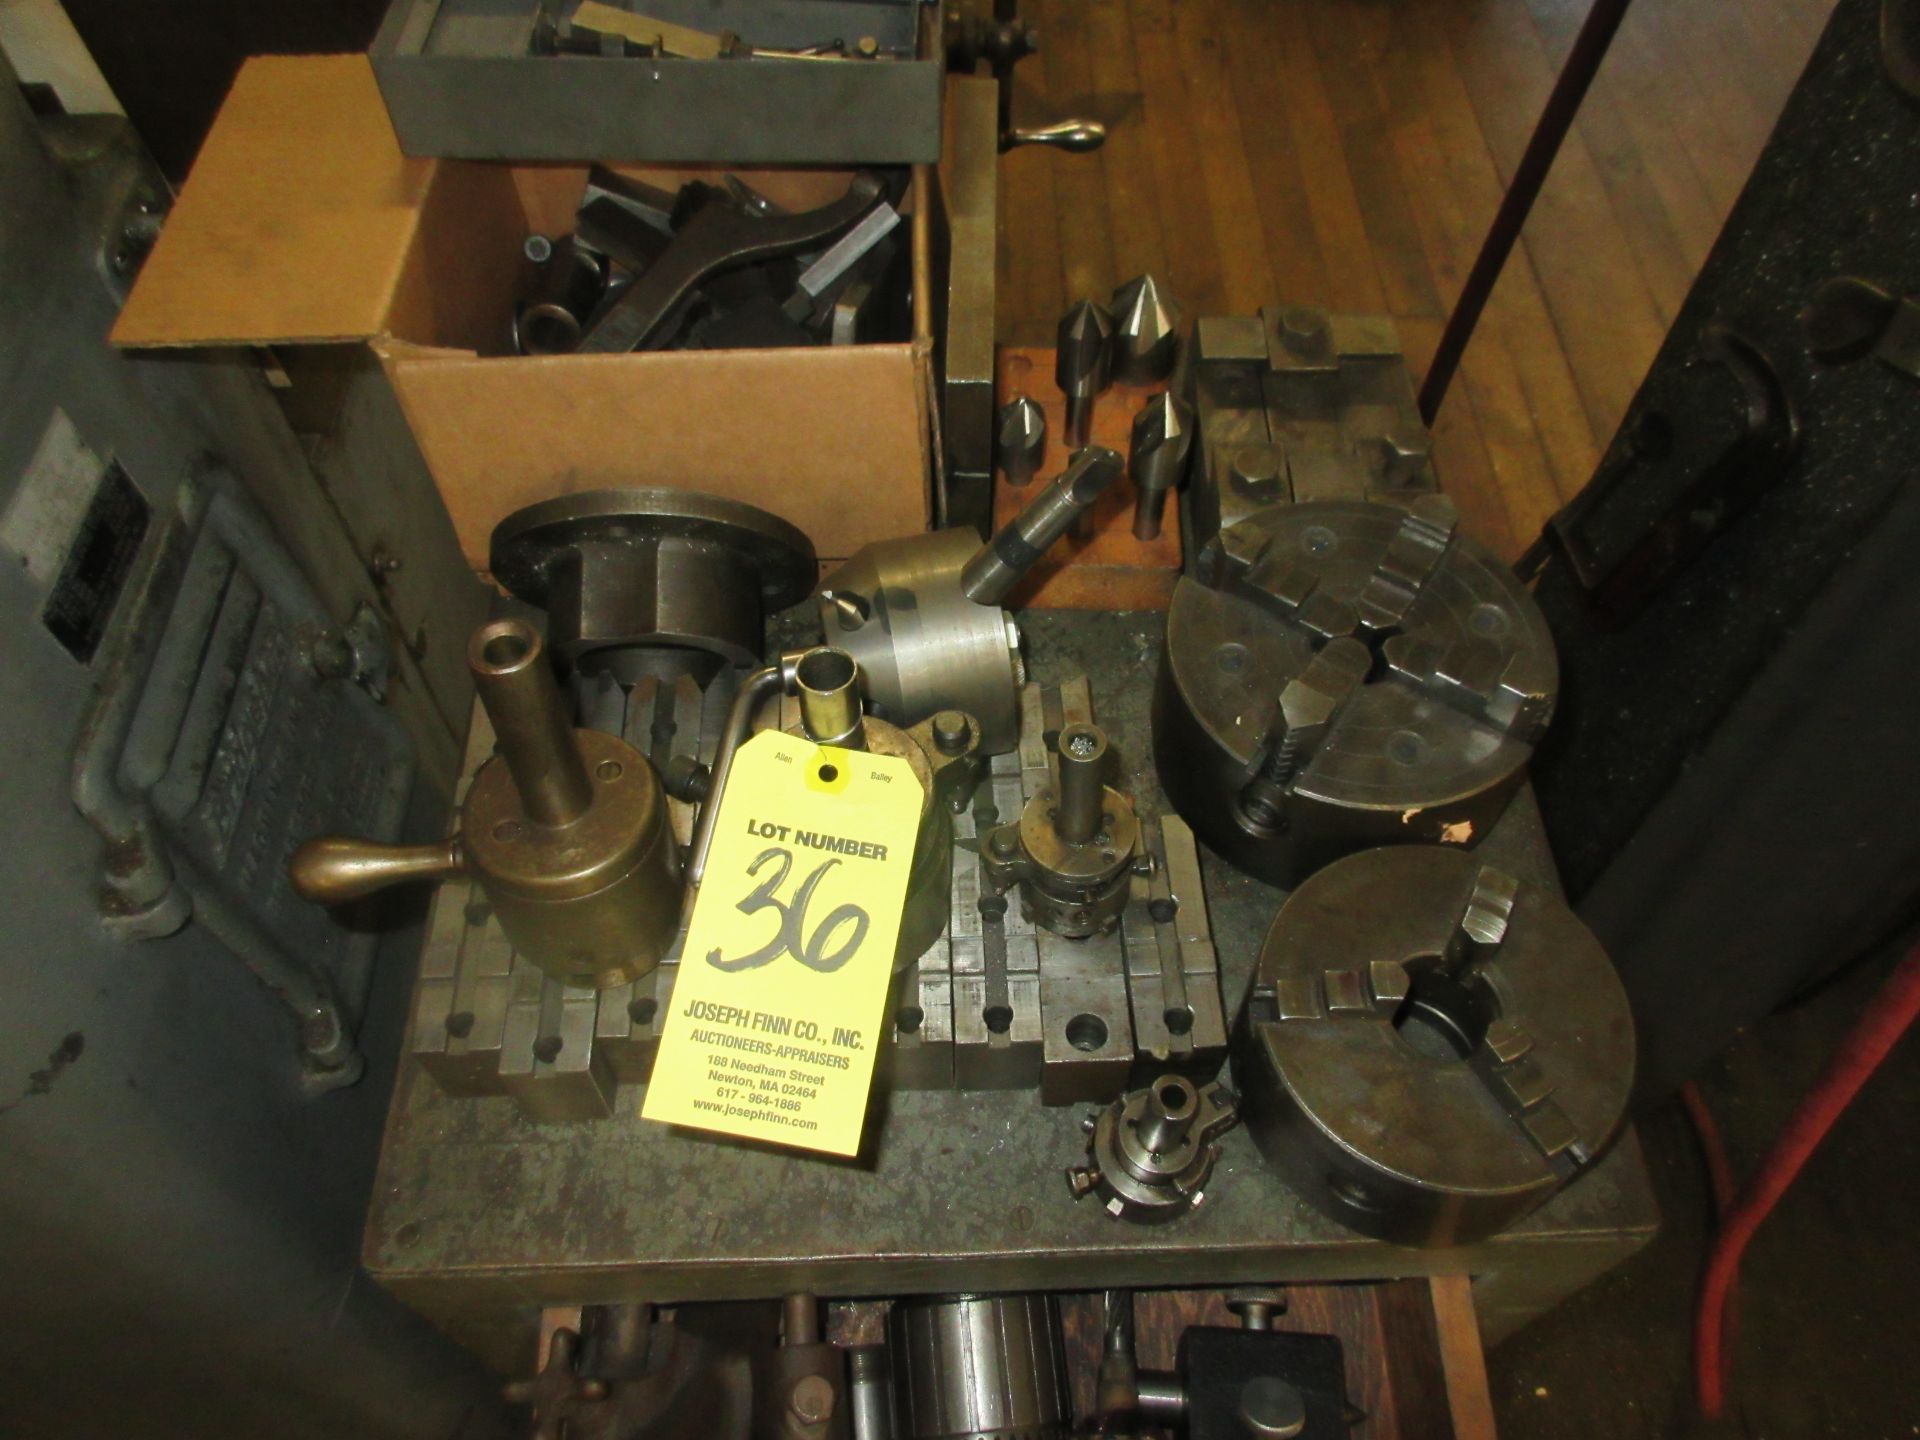 LOT Asst. Lathe Tooling Consisting of: 3 & 4 Jaw Chucks, Face Plates, Spindle Noses, Cross Table, - Image 2 of 4